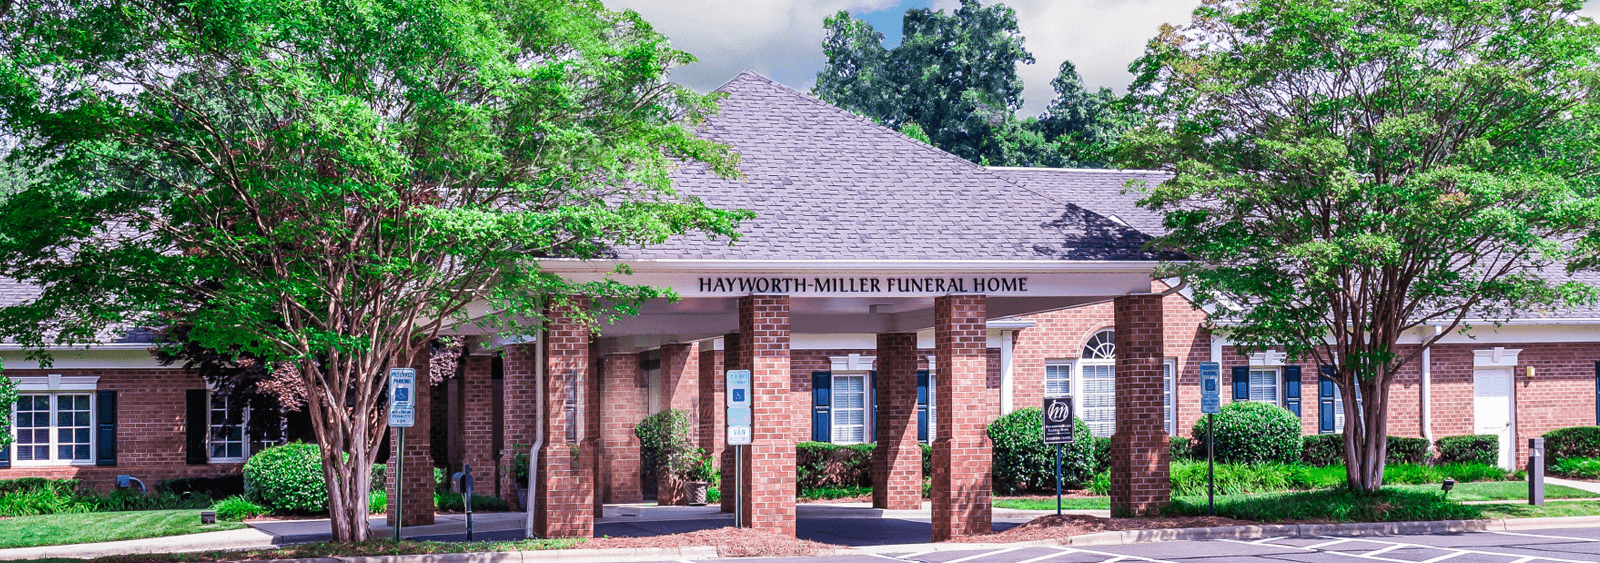 Online Pre-Planning Now at Hayworth-Miller in Advance, NC. Preplanning Funeral, Cremation for the future.